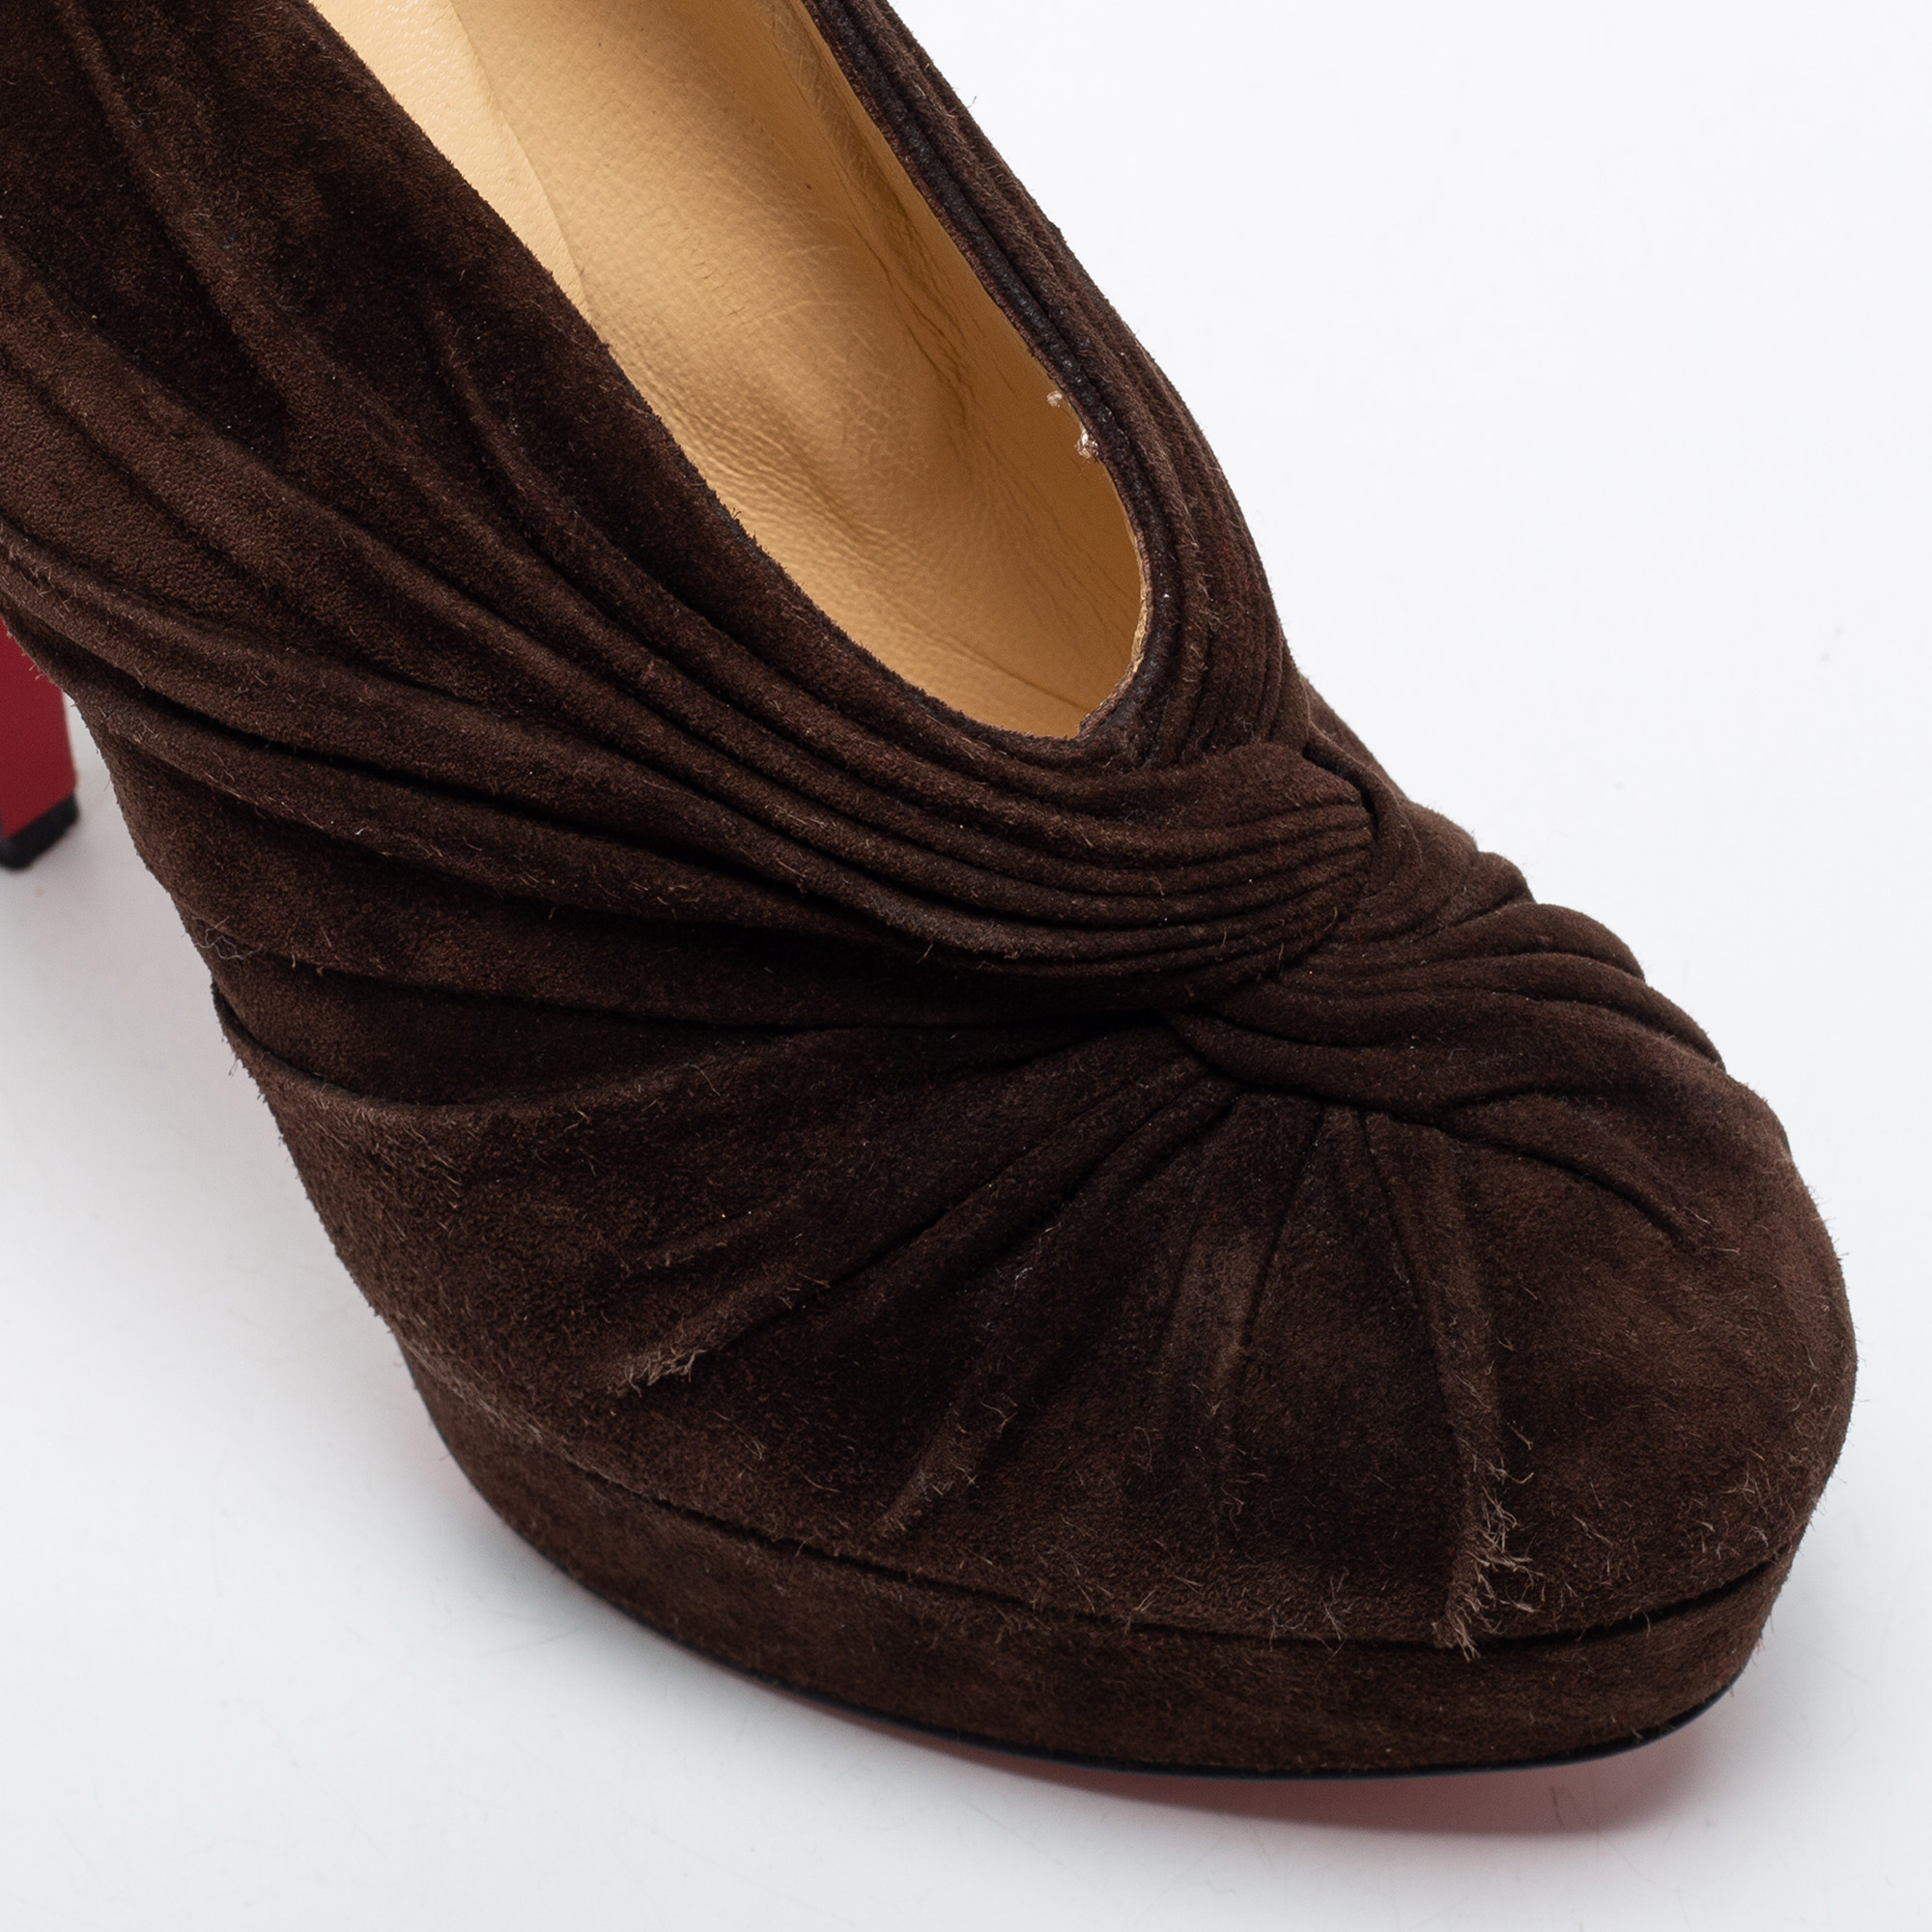 Christian Louboutin Brown Pleated Suede Platform Ankle Booties Size 35.5